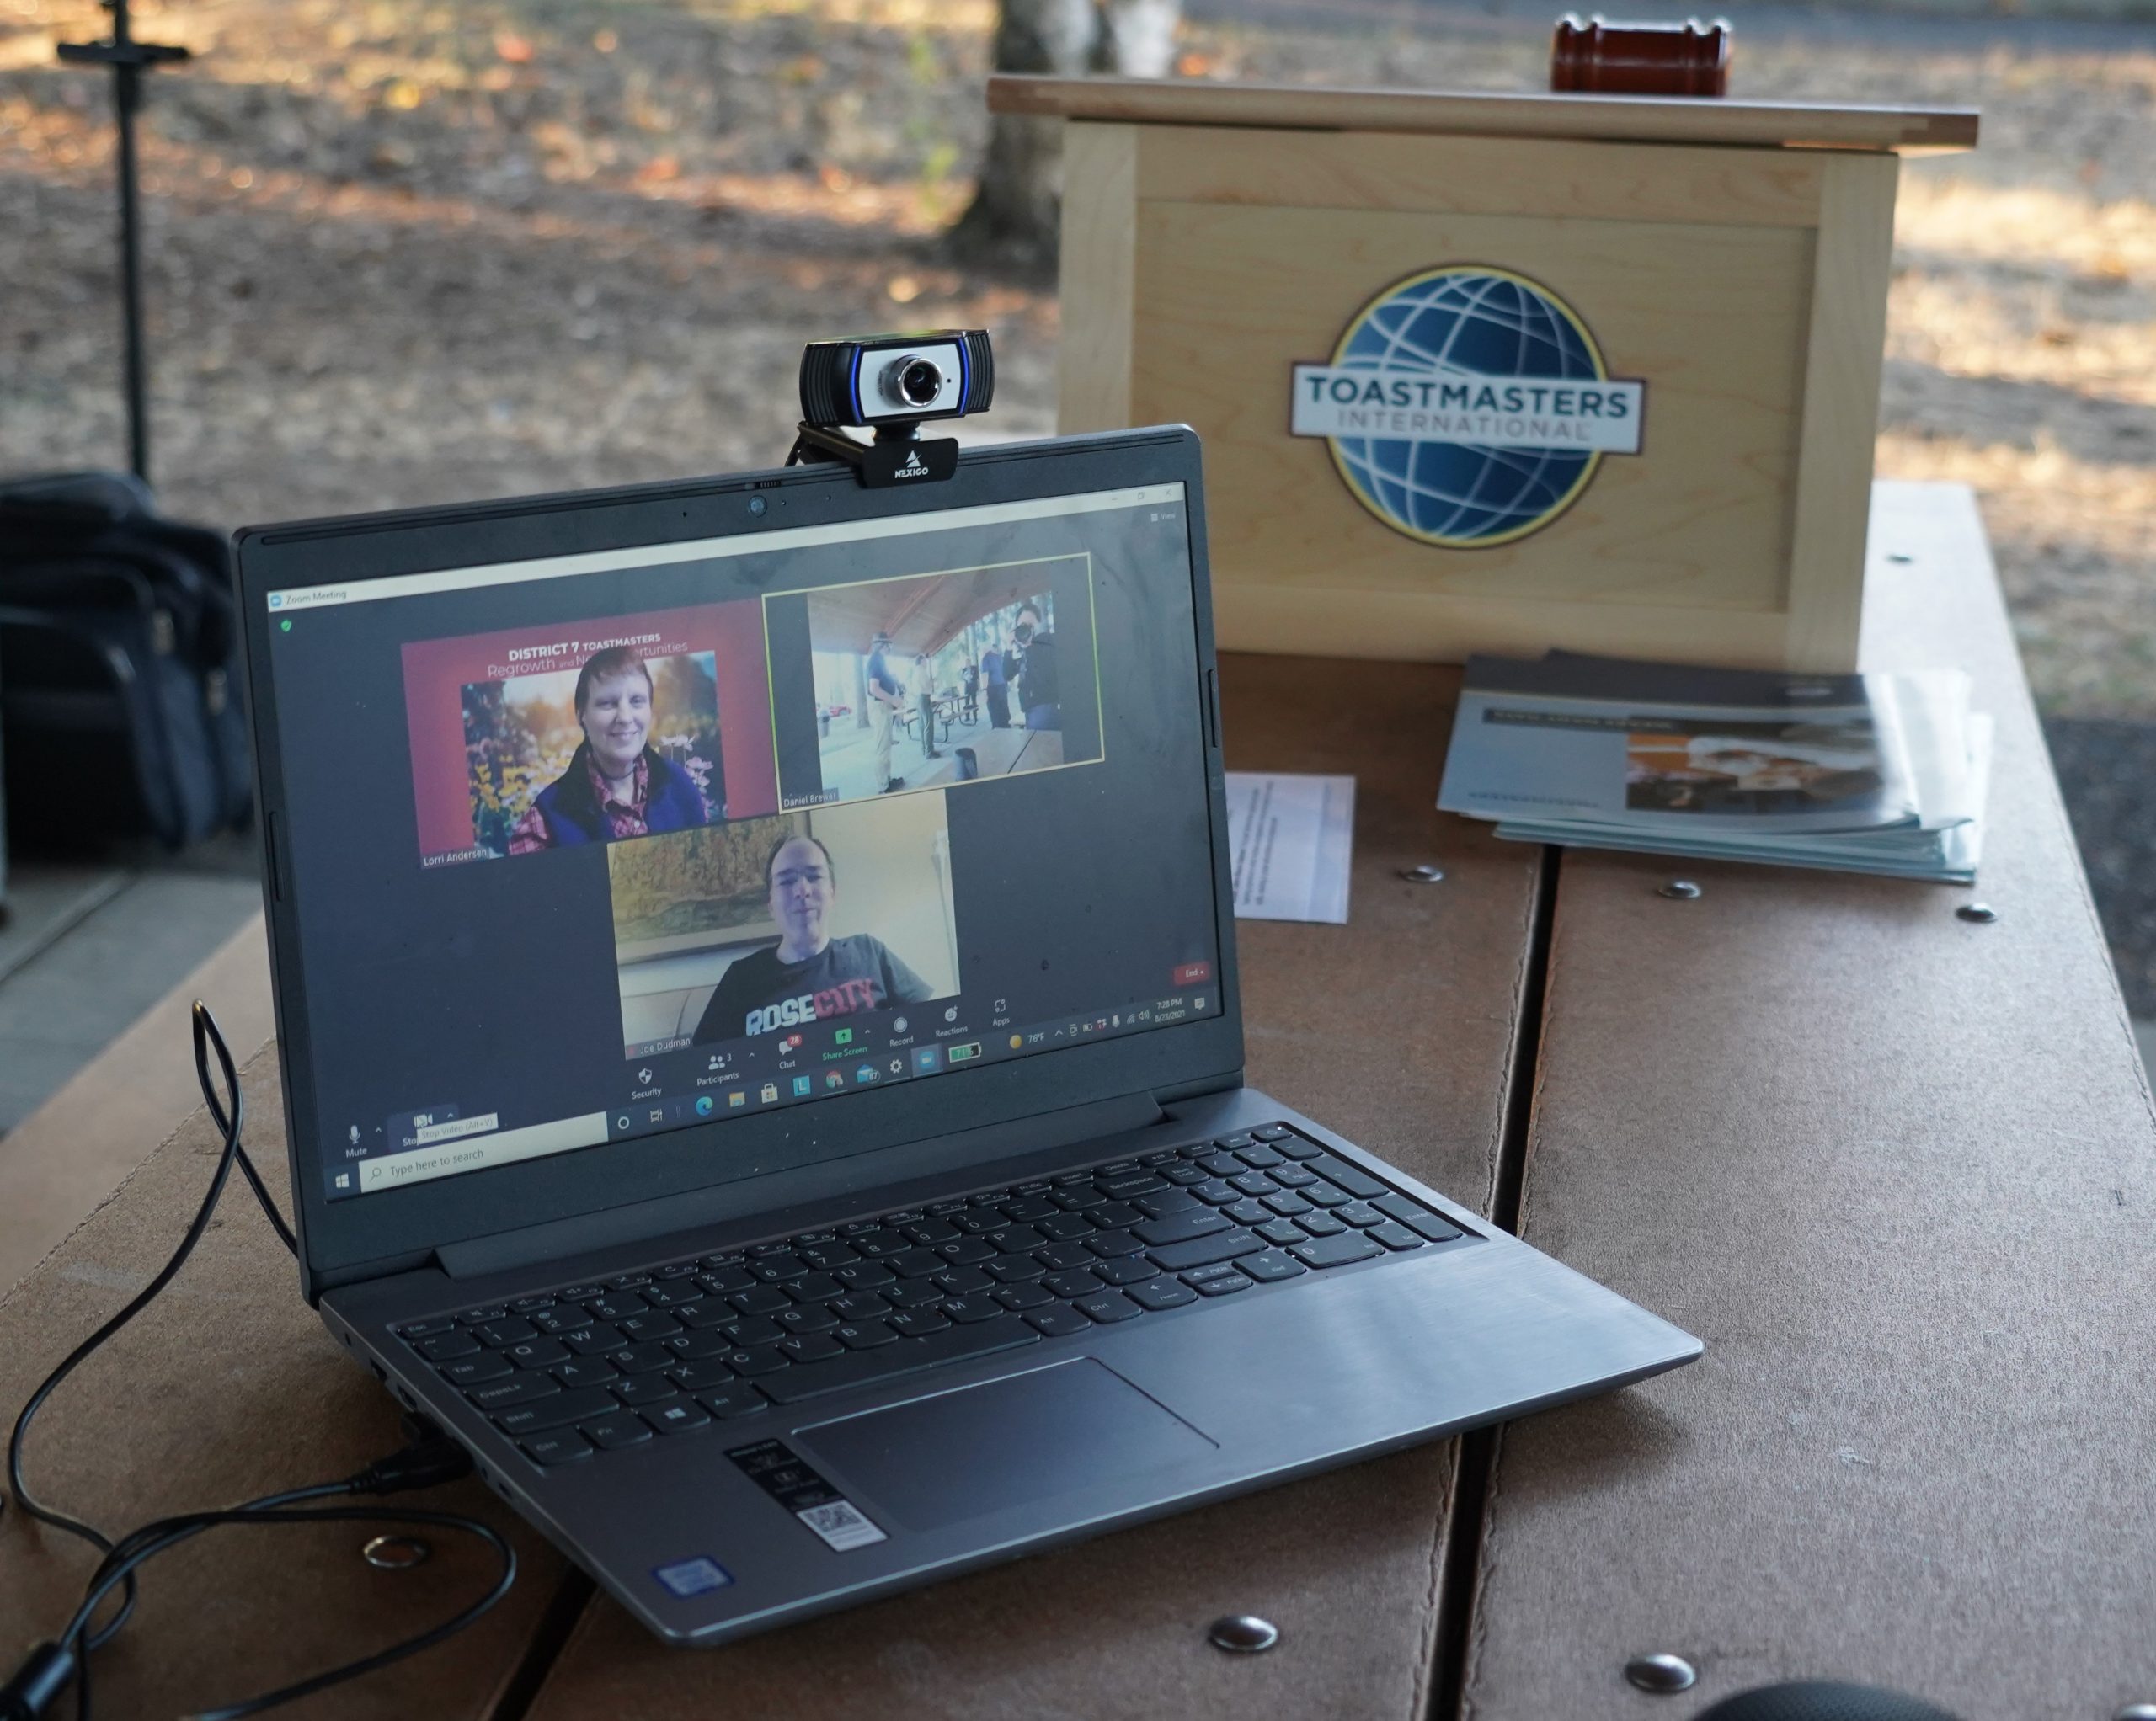 A laptop with web cam mounted, with several Zoom participants showing on screen, and Toastmasters portable lectern and gavel in the background